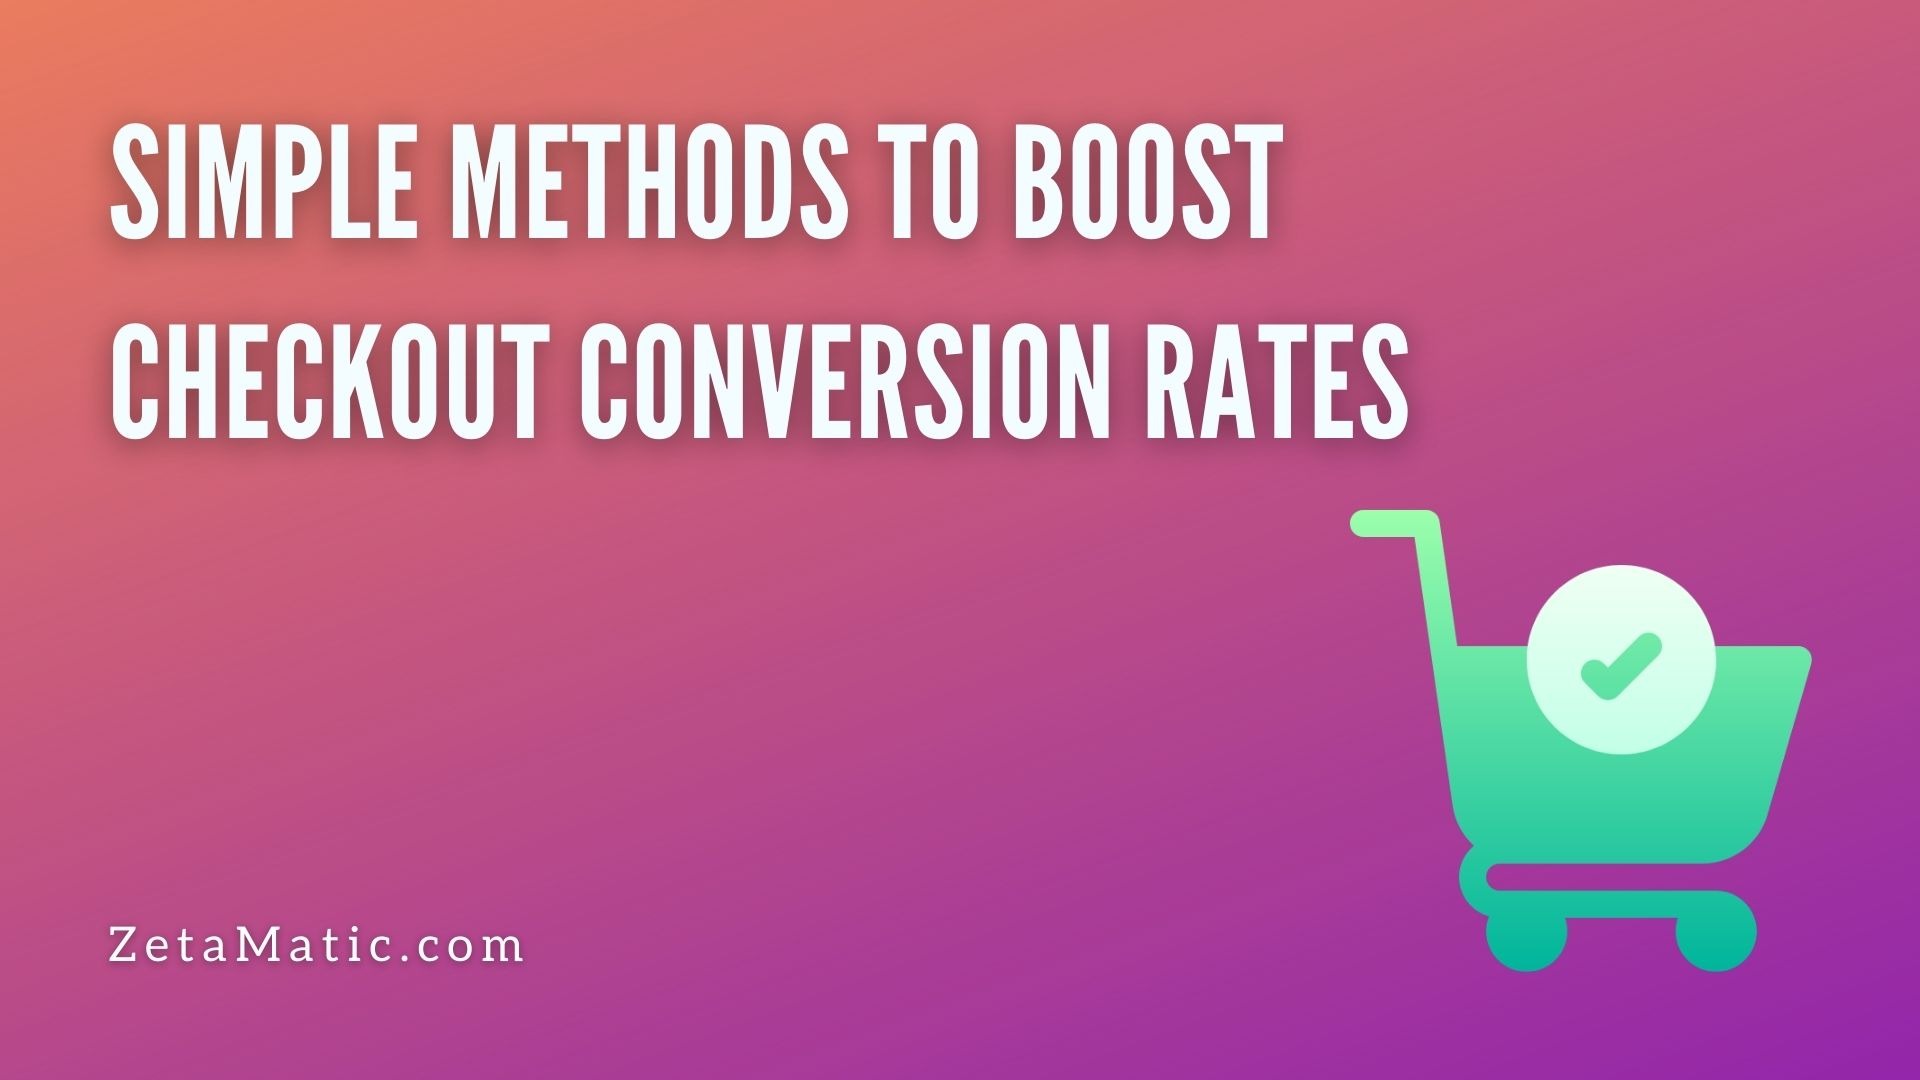 Simple Methods to Boost Checkout Conversion Rates